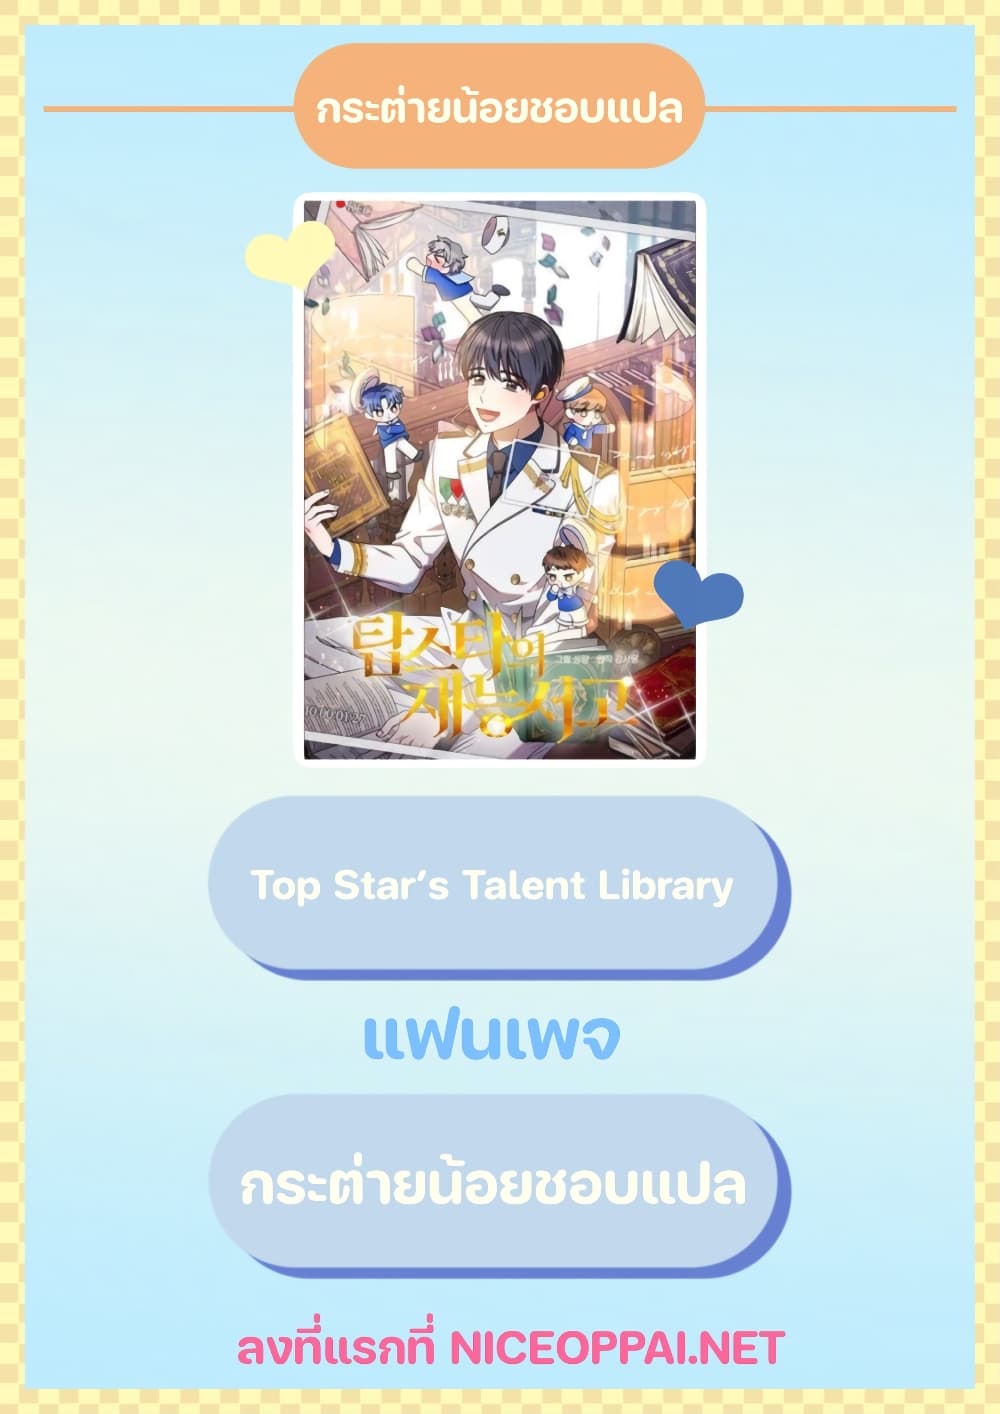 Top Star's Talent Library 9-9